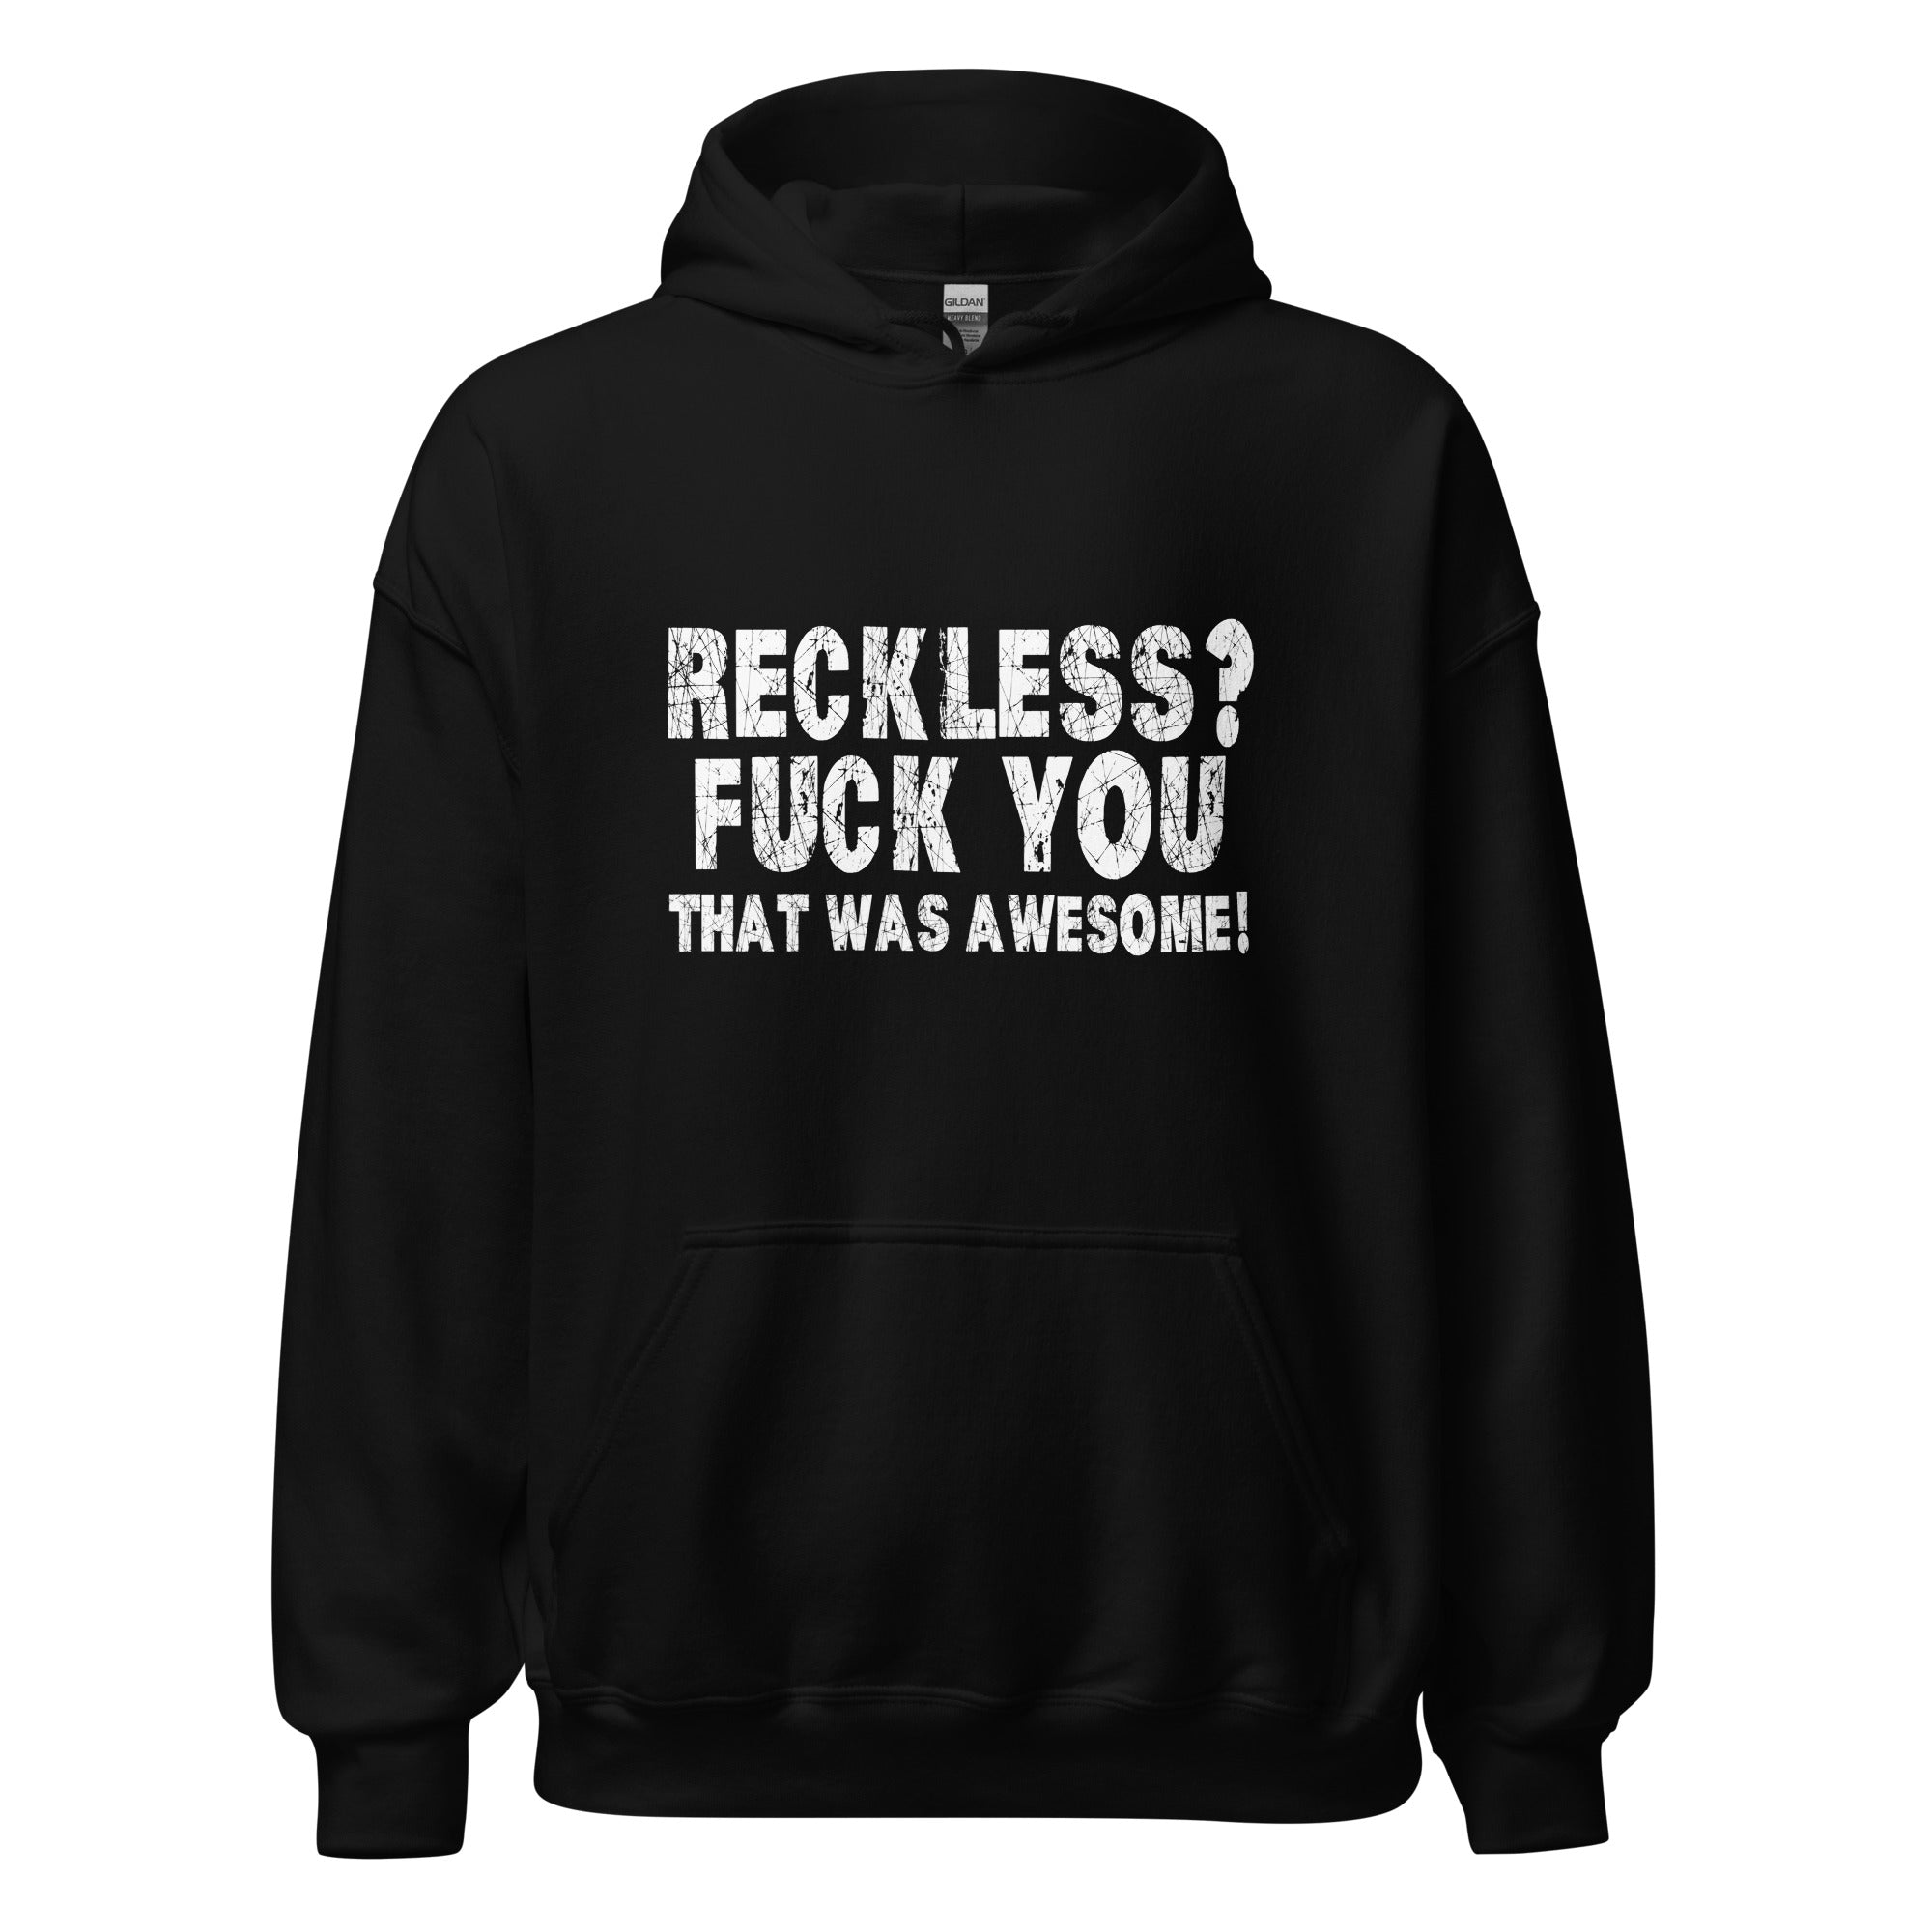 RECKLESS?! | FY THAT WAS AWESOME!